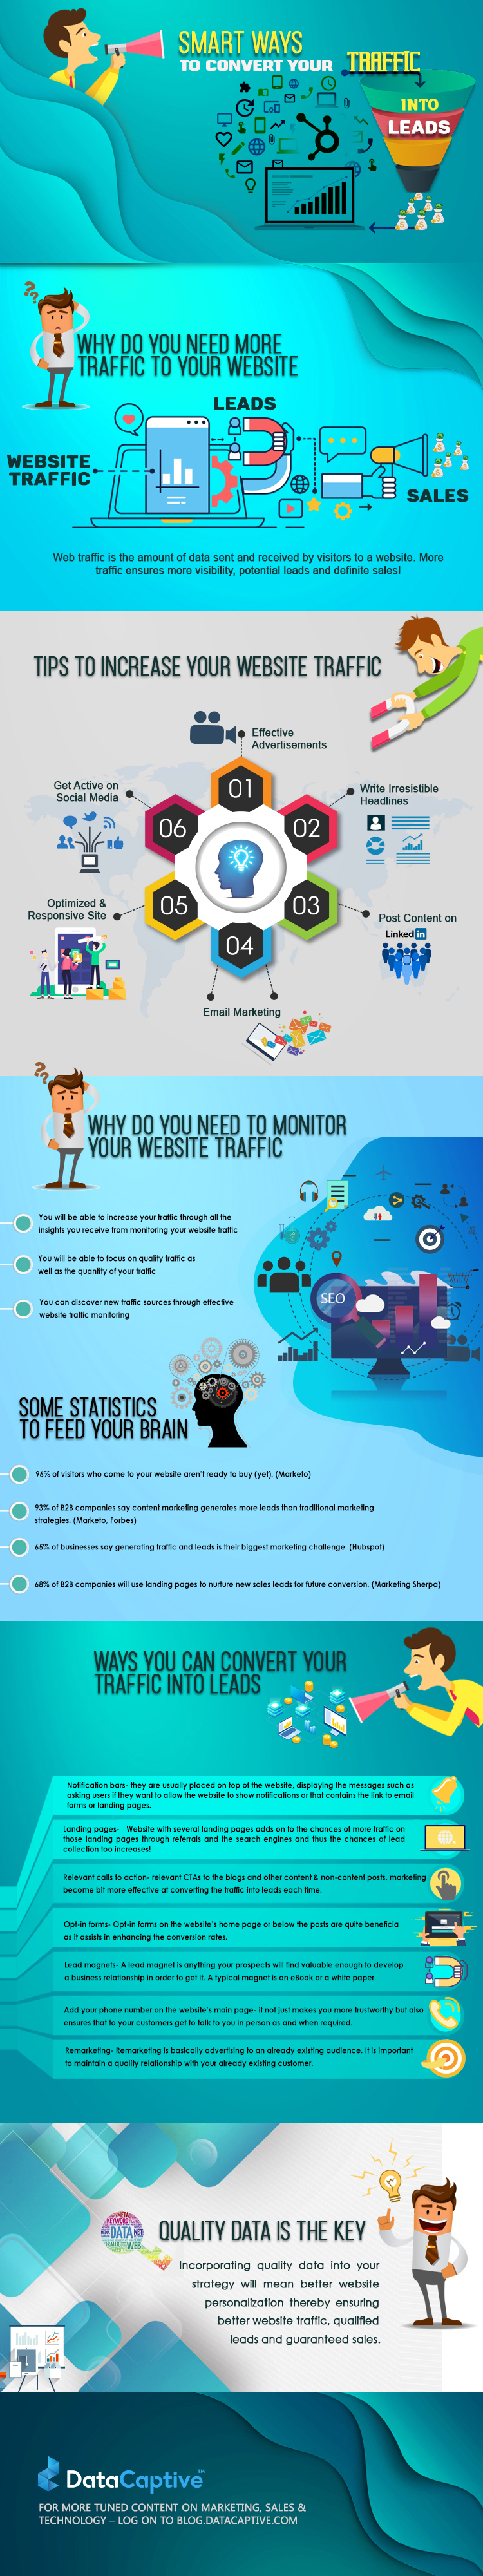 Smart ways to convert traffic into leads - DataCaptive Infographic